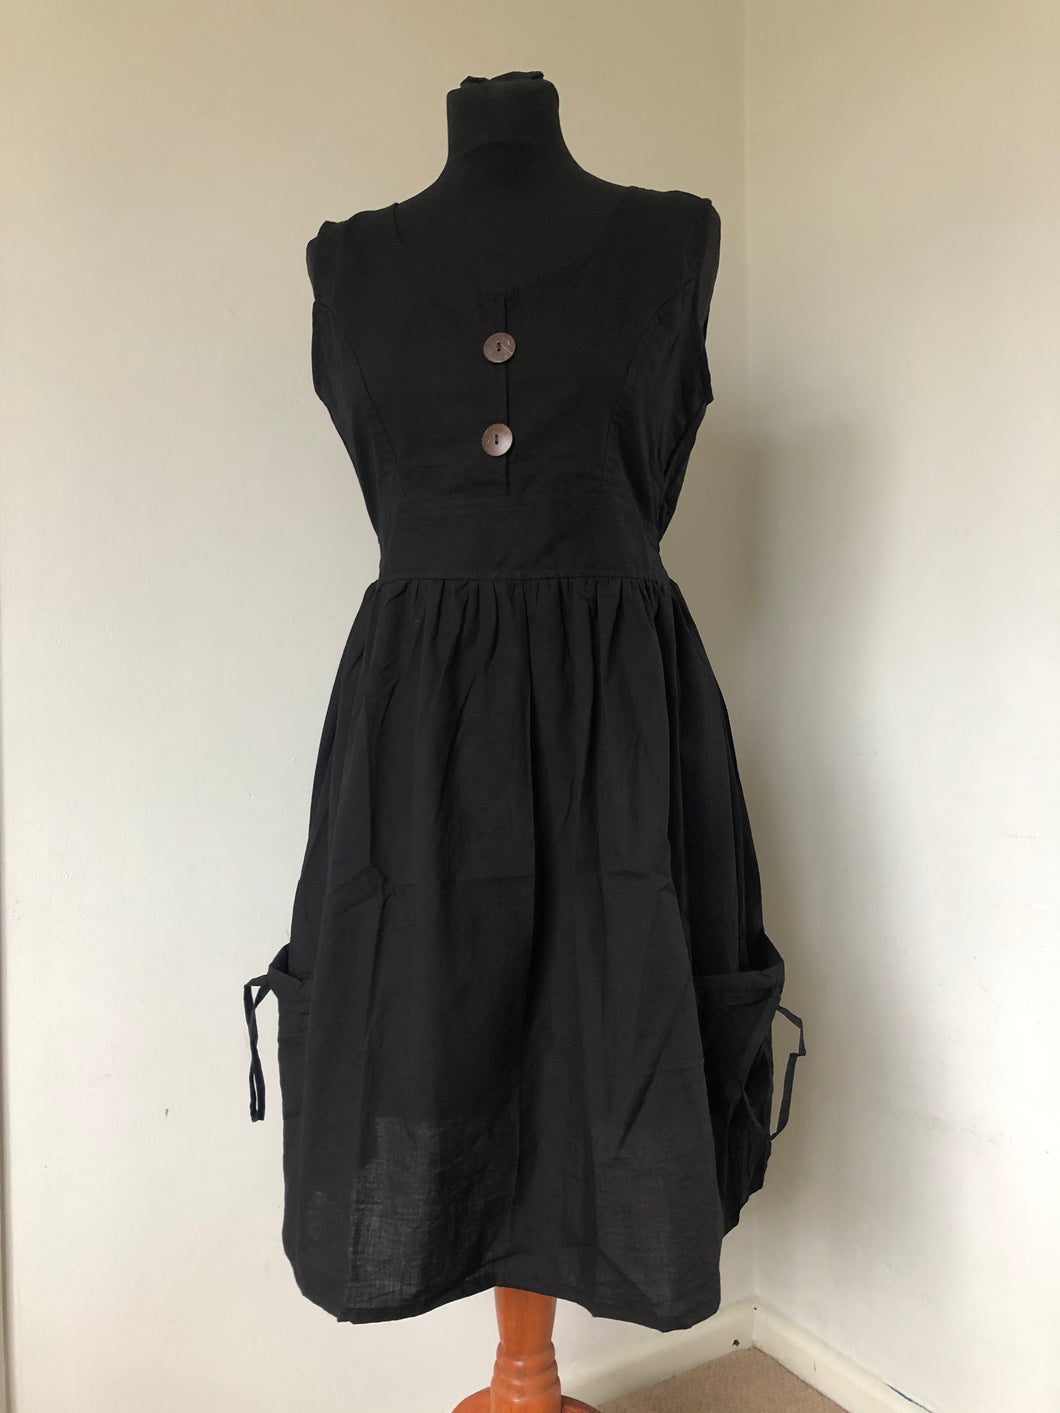 Buy now online from Emma's Emporium. Organic cotton summer sun dress with side pockets. Emma's Emporium women's festival clothing